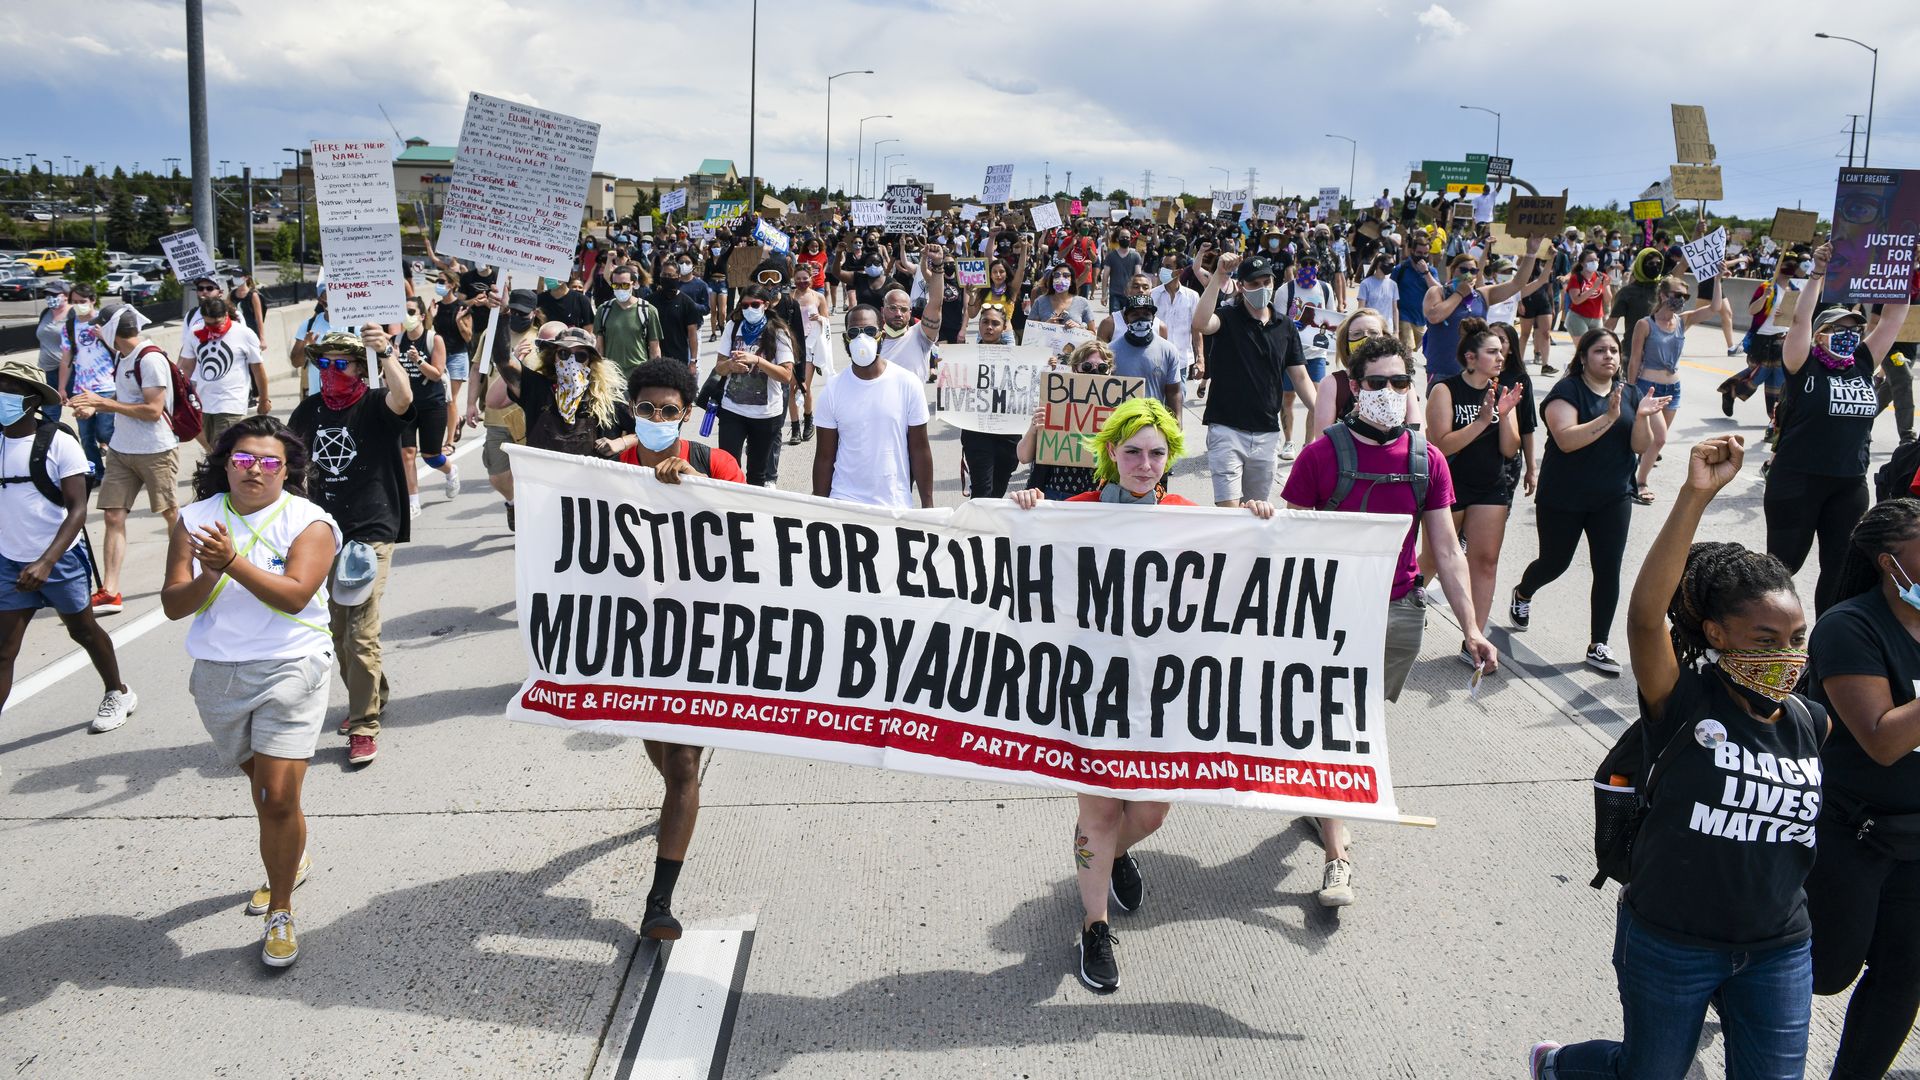 Photo of a crowd of protesters, including two holding a banner that says "Justice for Elijah McClain, murdered by Aurora police"